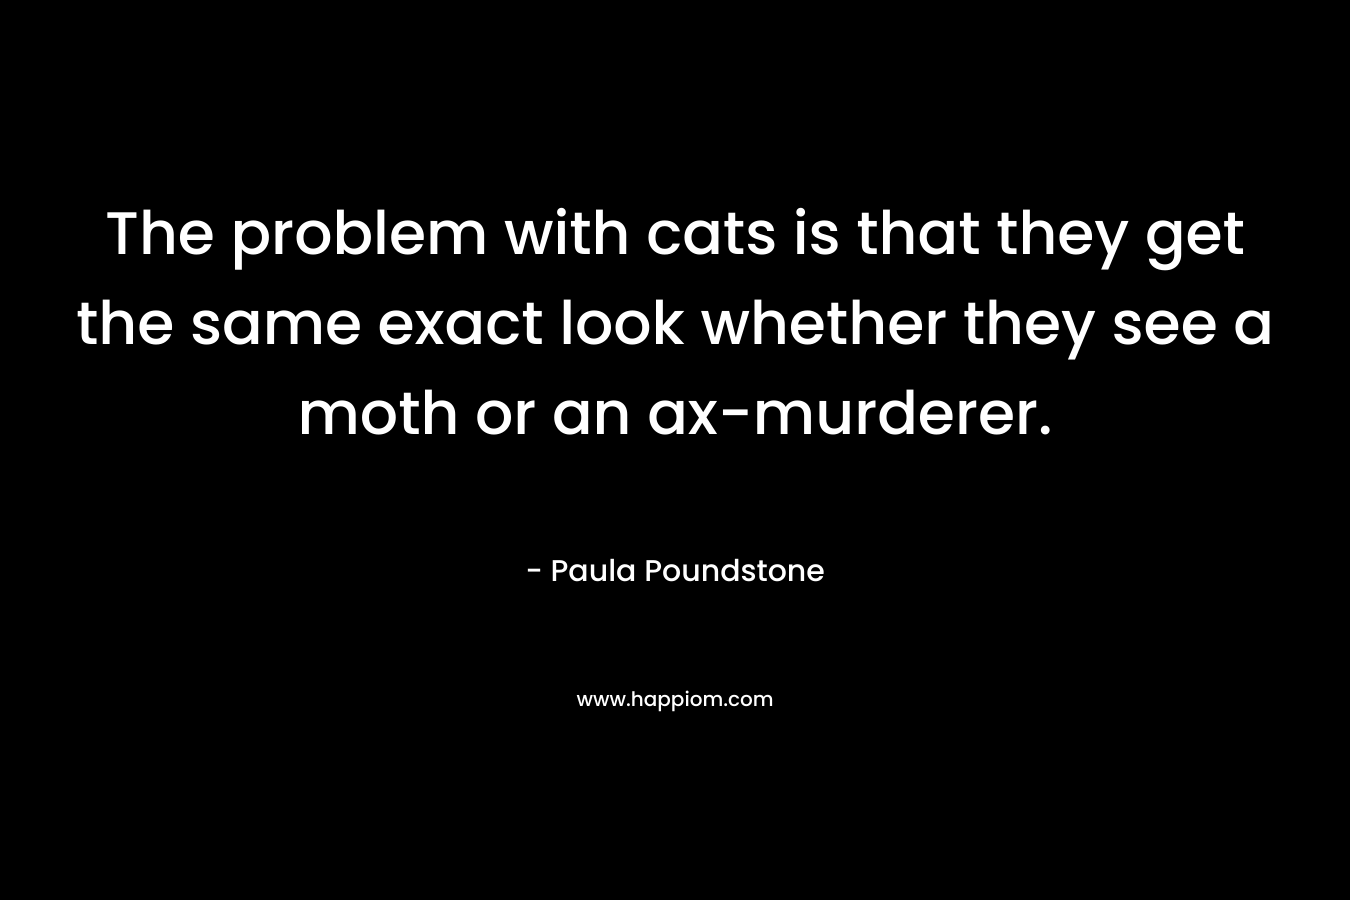 The problem with cats is that they get the same exact look whether they see a moth or an ax-murderer. – Paula Poundstone